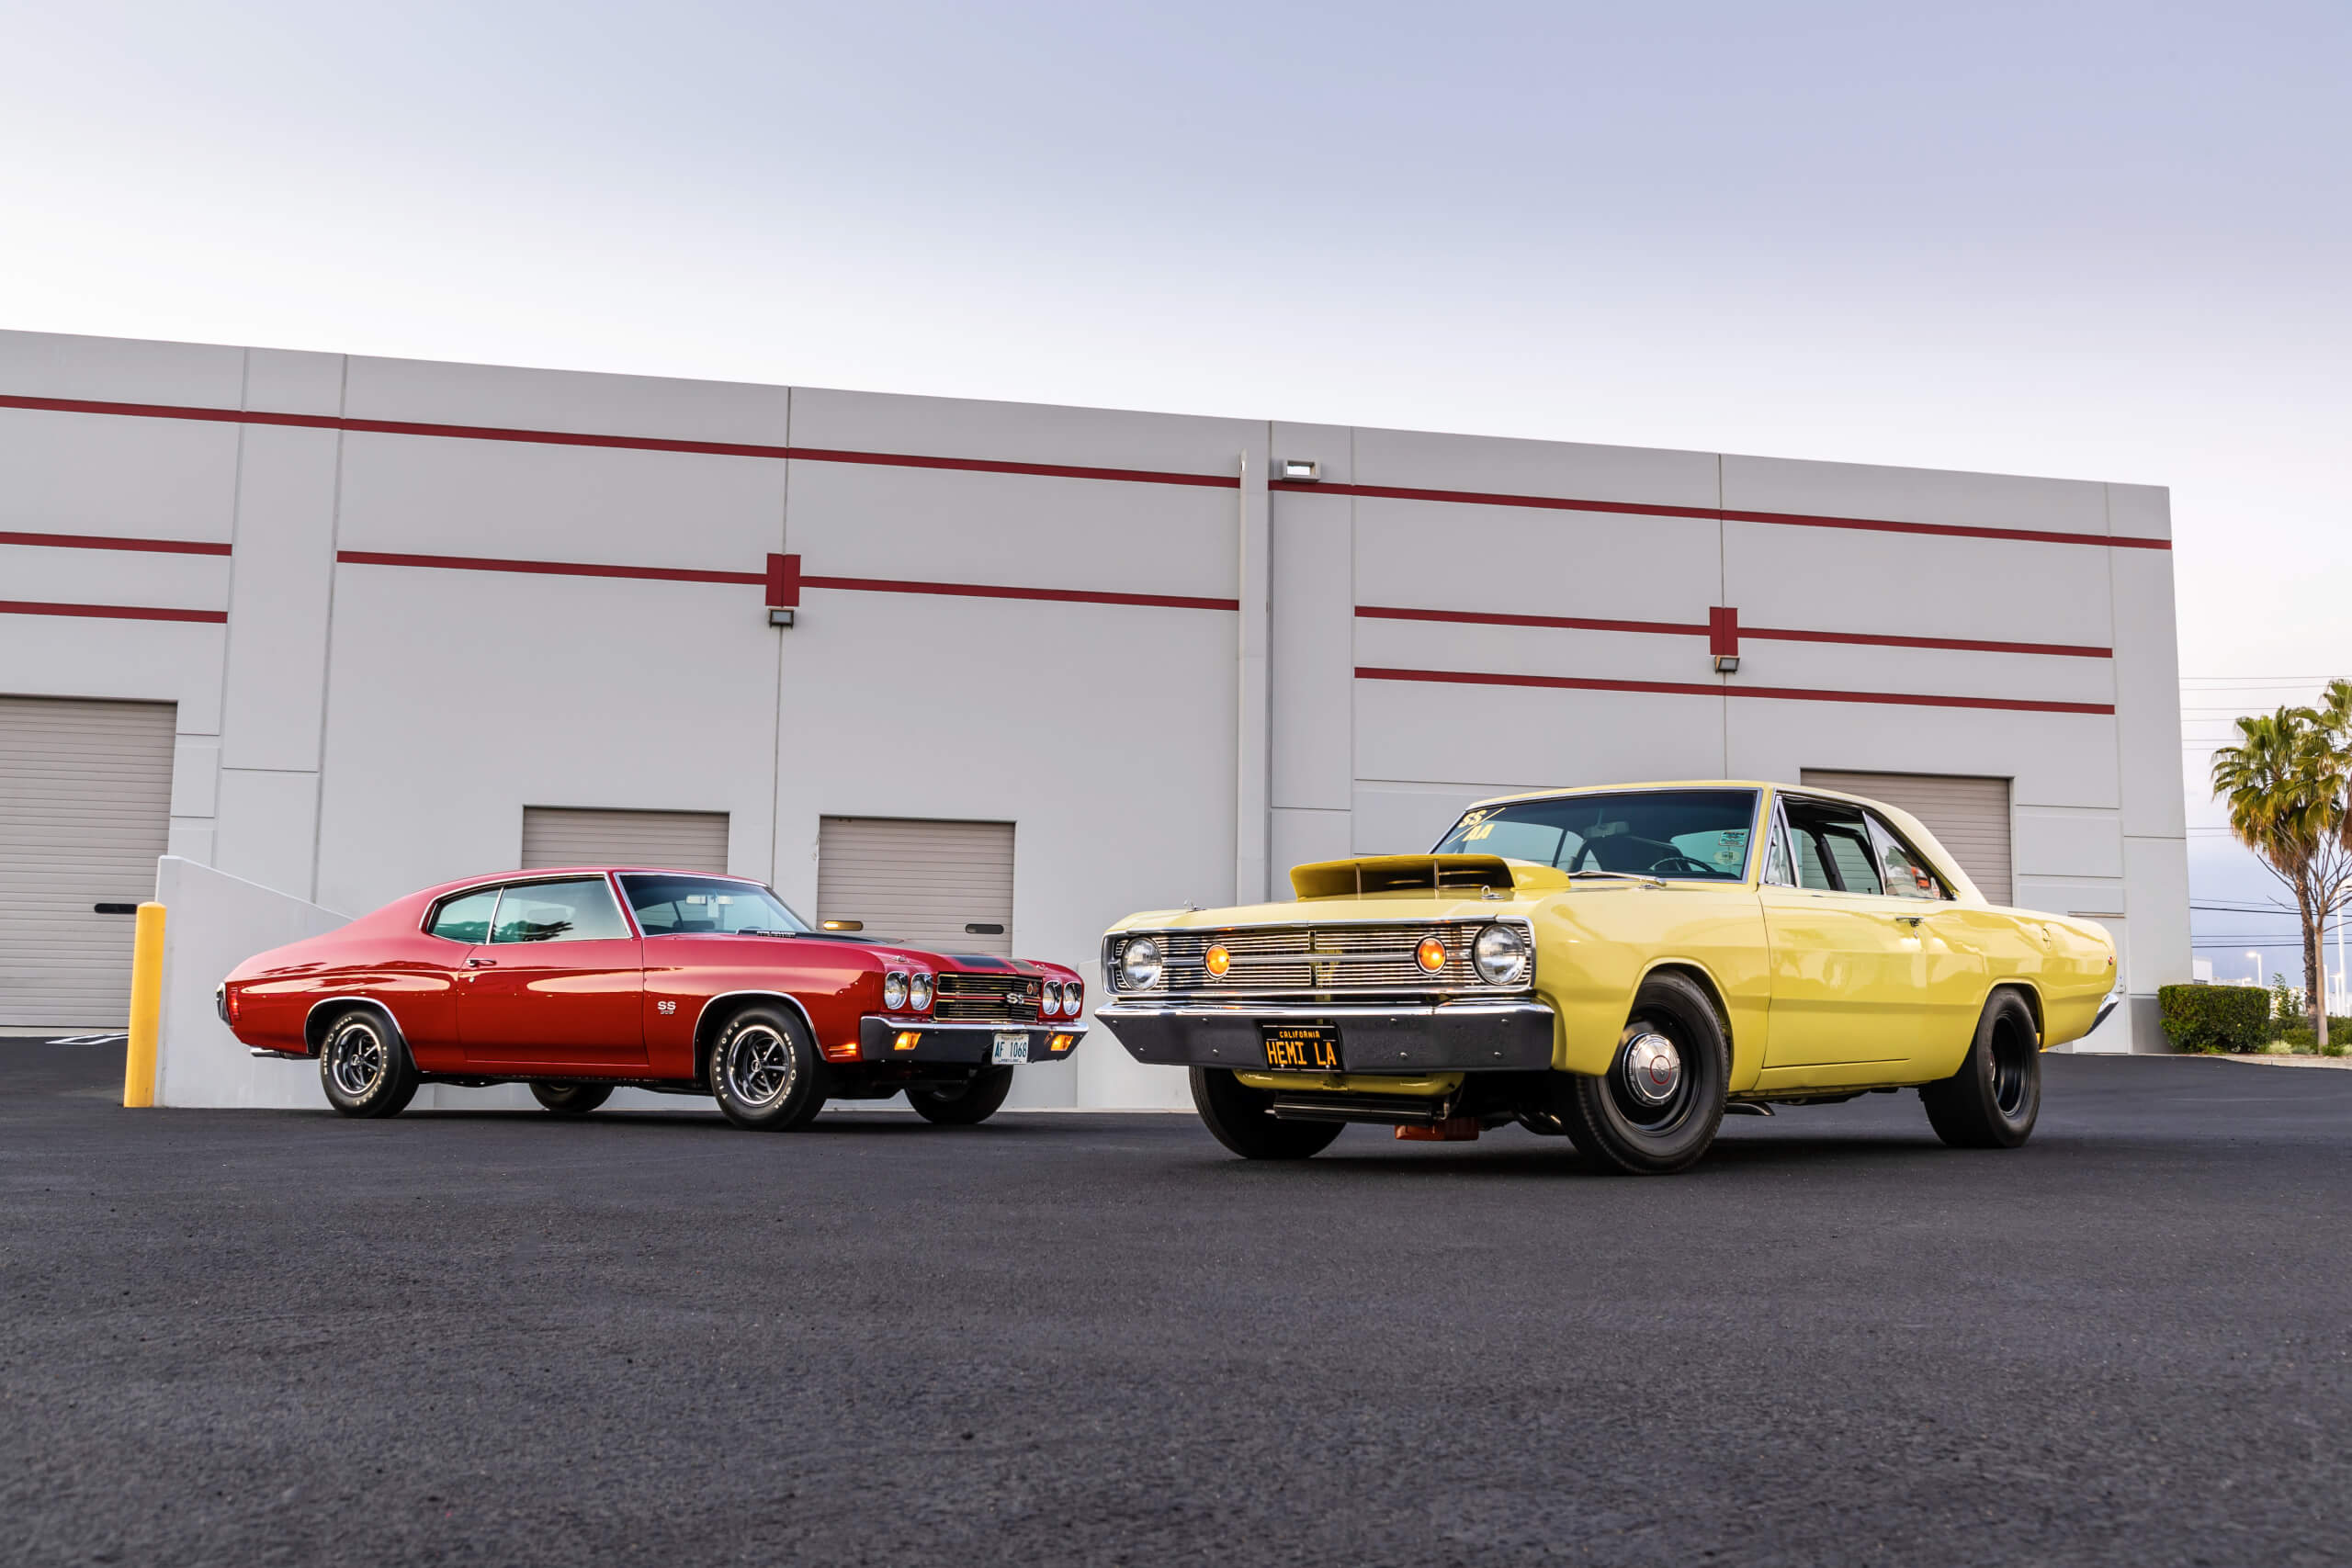 Drive It or Show It? How One Car Collector Says ‘Yes’ to Both